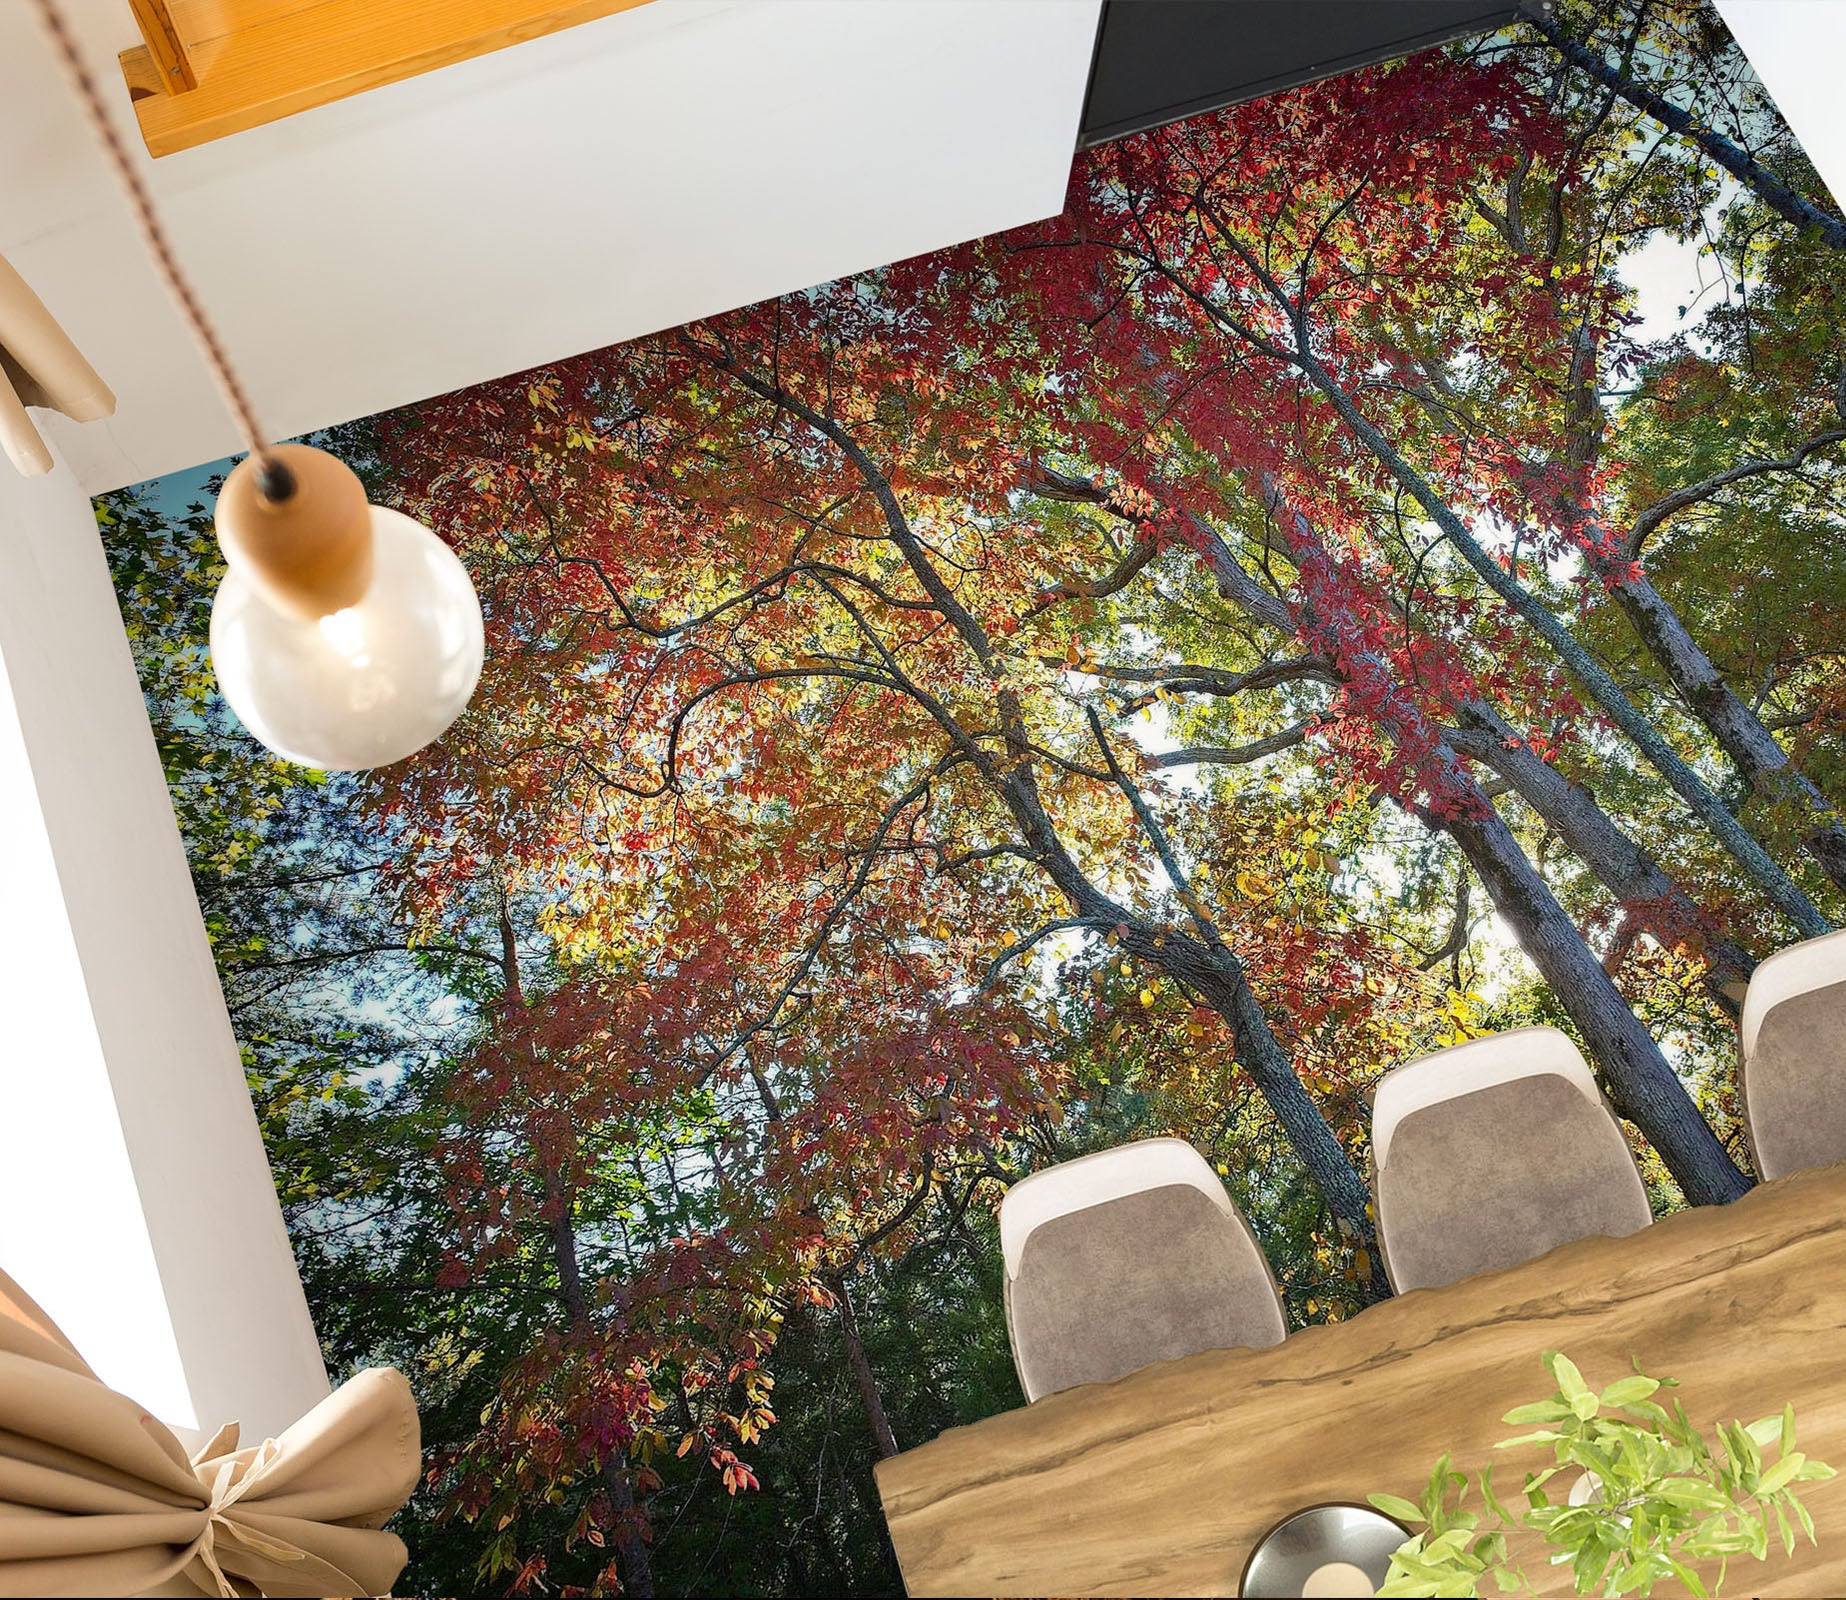 3D Forest 98189 Kathy Barefield Floor Mural  Wallpaper Murals Self-Adhesive Removable Print Epoxy